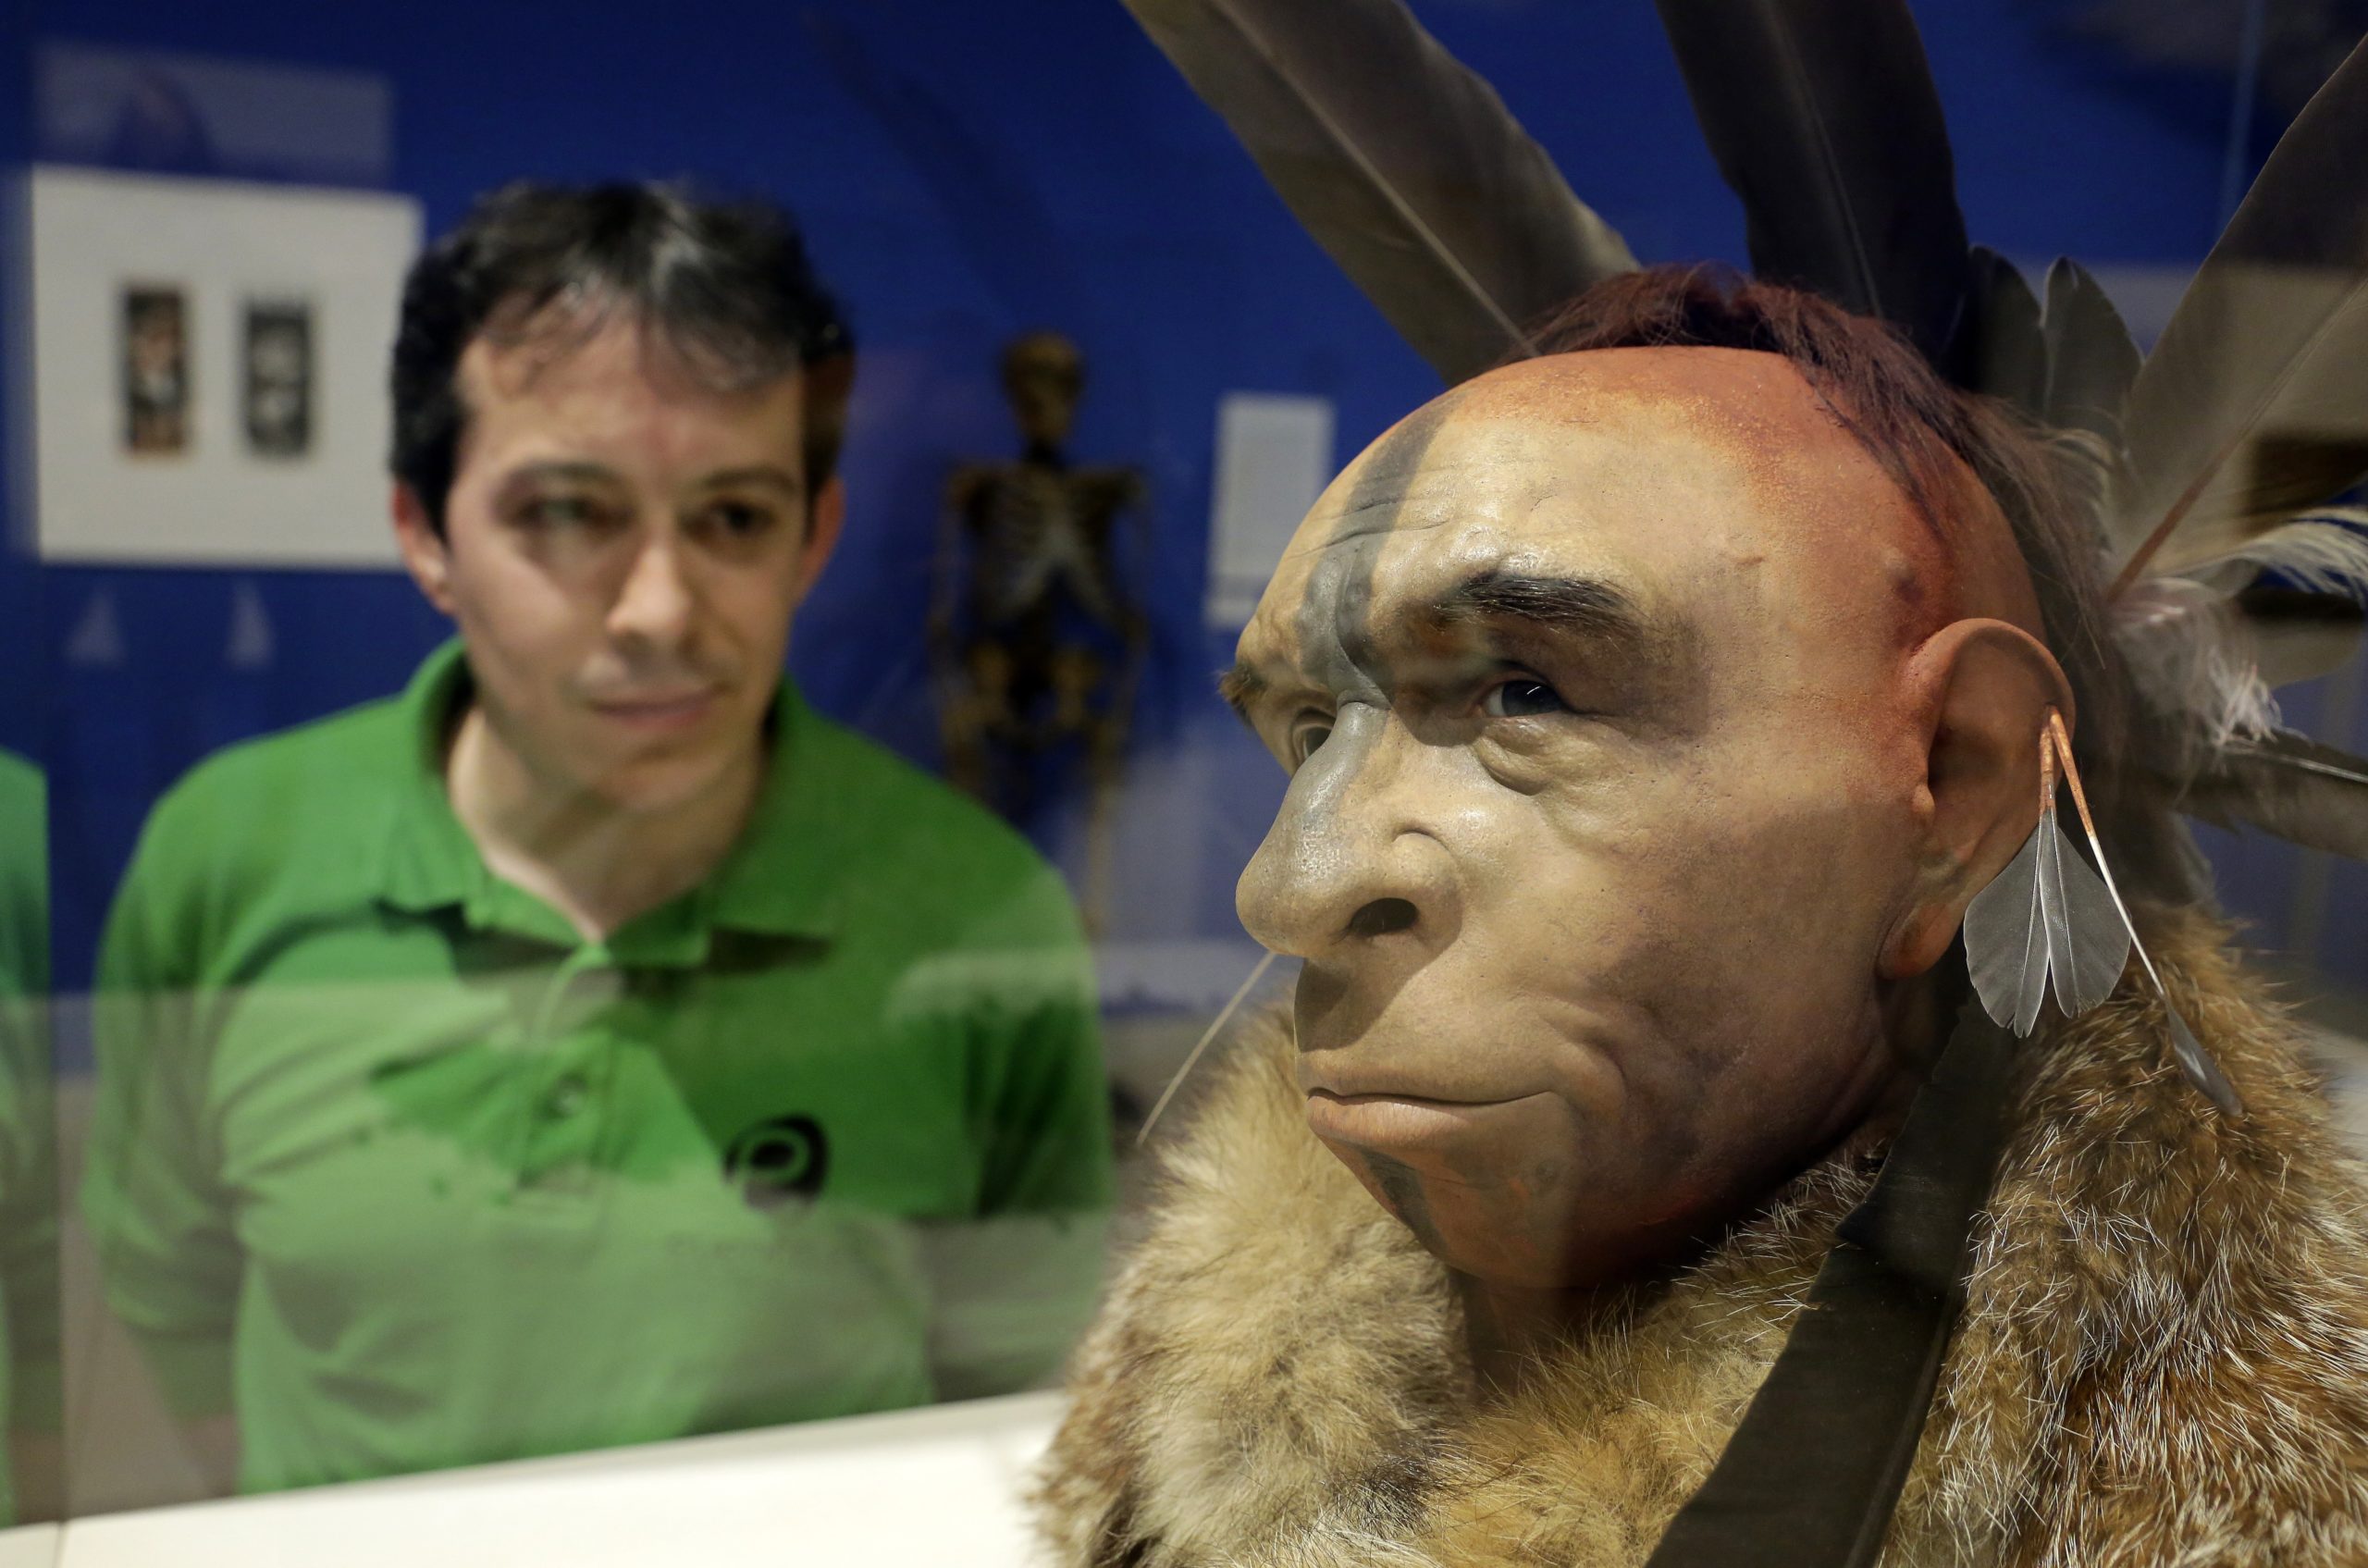 Understanding Neanderthals allows us to better chart our own evolutionary path. (Photo: CESAR MANSO/AFP via Getty Images, Getty Images)